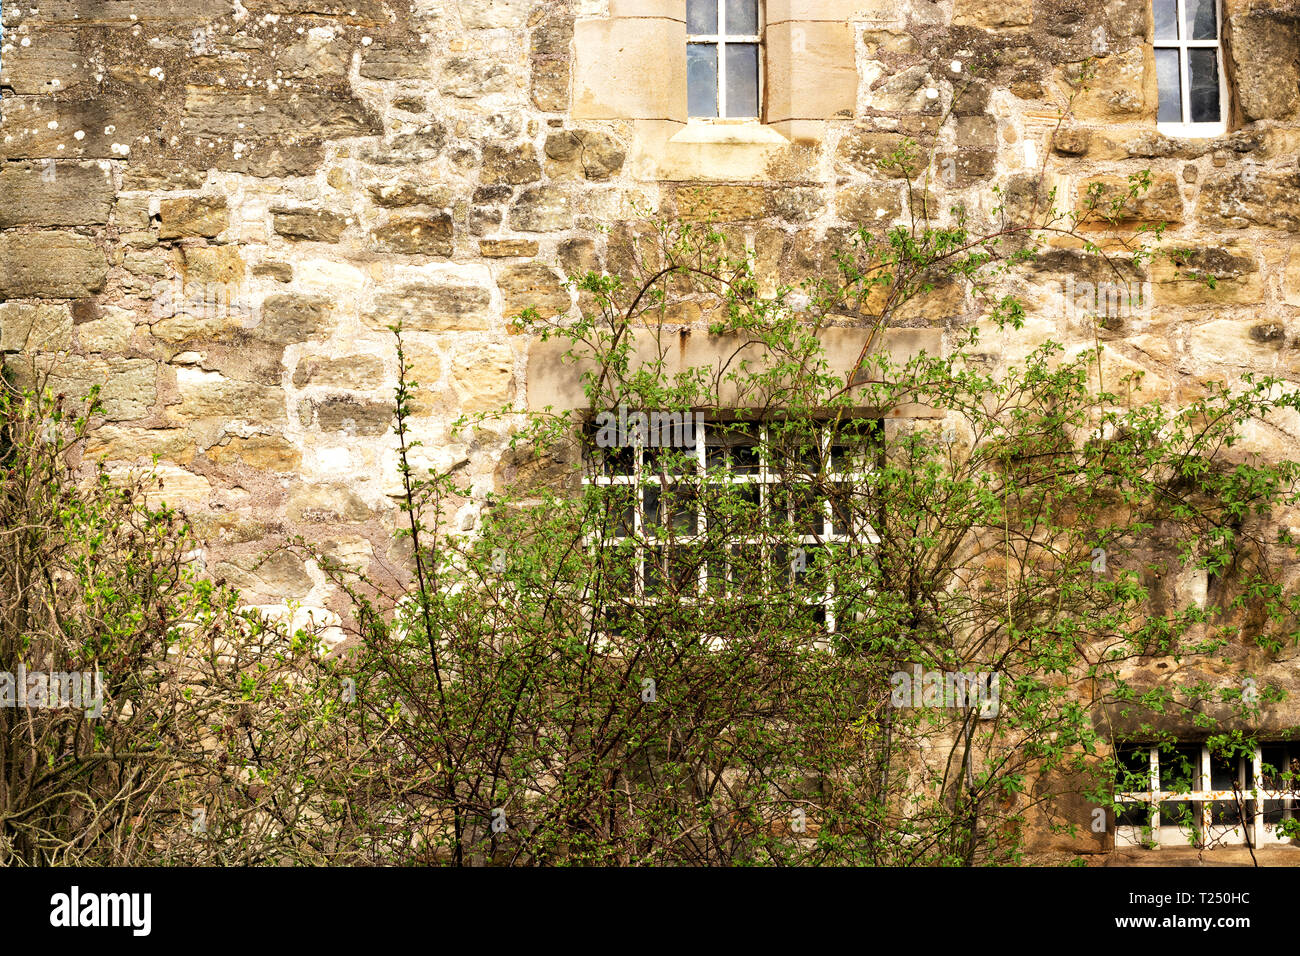 Stone wall of an old building with windows and a clambering plant Stock Photo